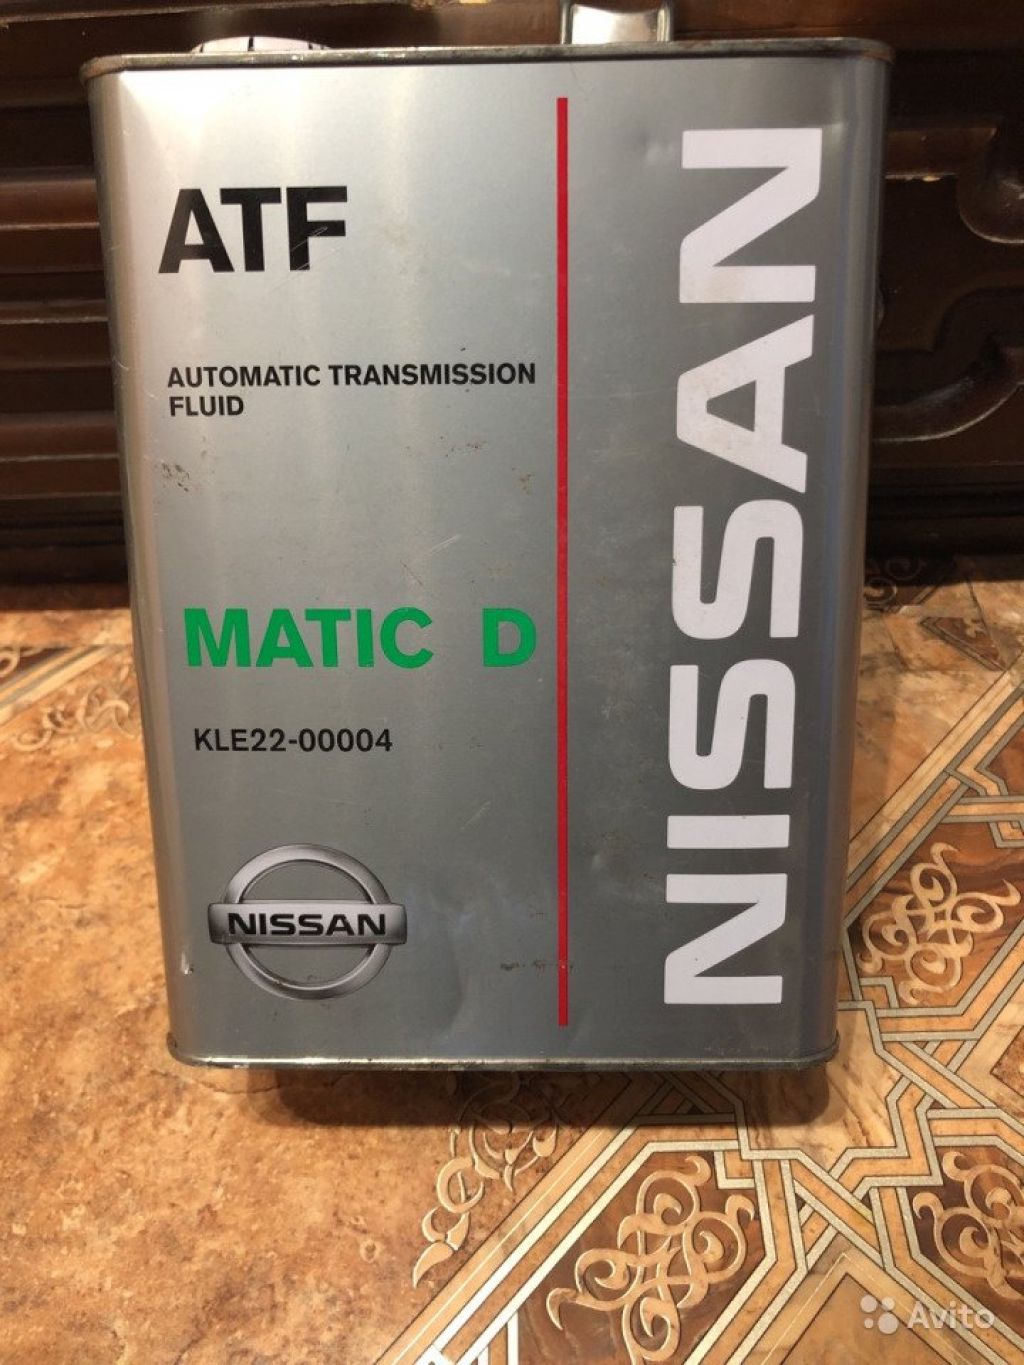 Масло nissan atf matic. Nissan ATF matic d (артикул 4л — kle22-00004). Nissan ATF matic d. Nissan kle22-00004. Nissan matic d ATF артикул.